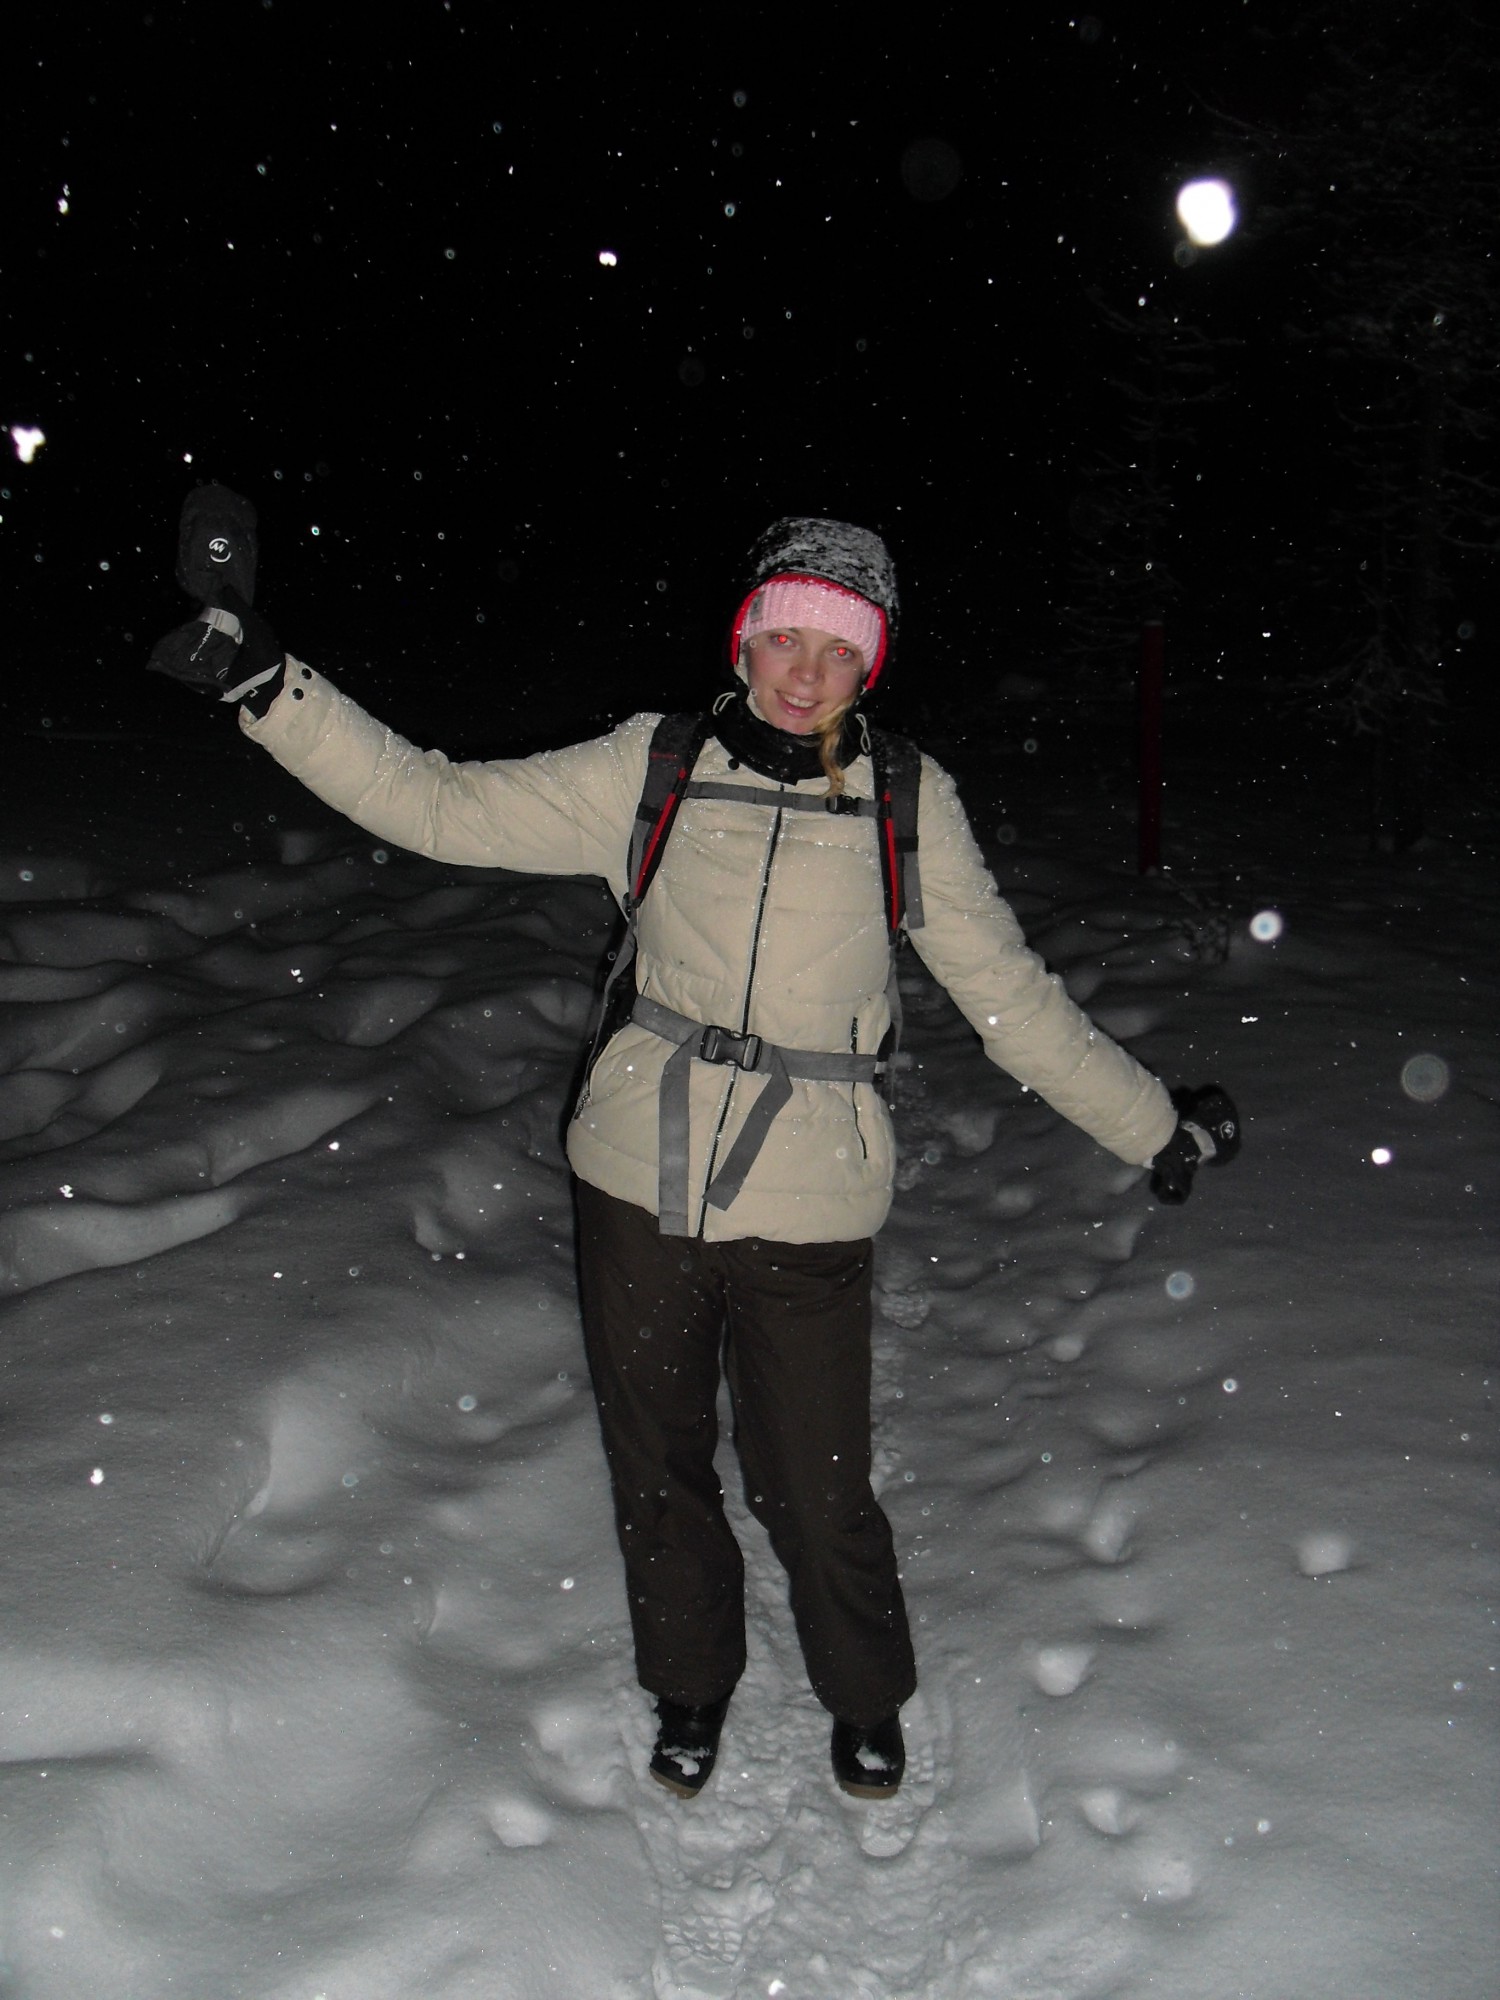 Me in the snow!